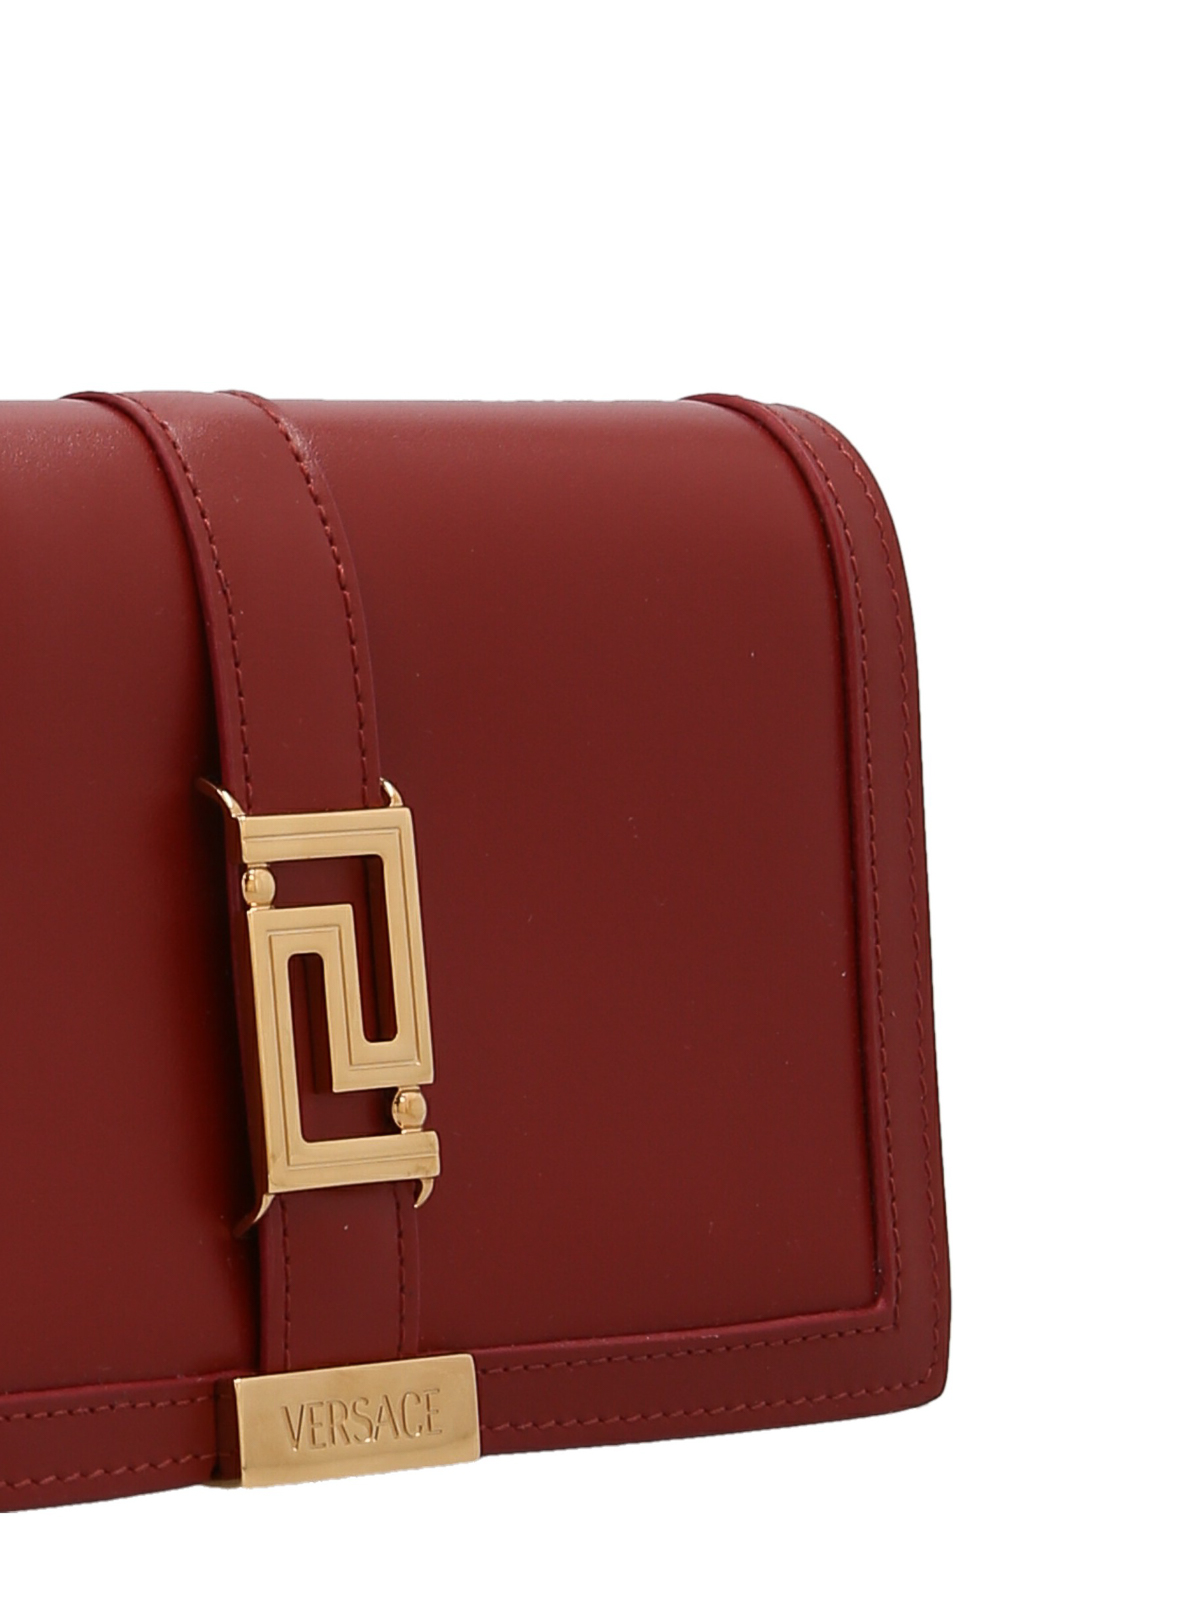 Greca Goddess Leather Clutch in Red - Versace